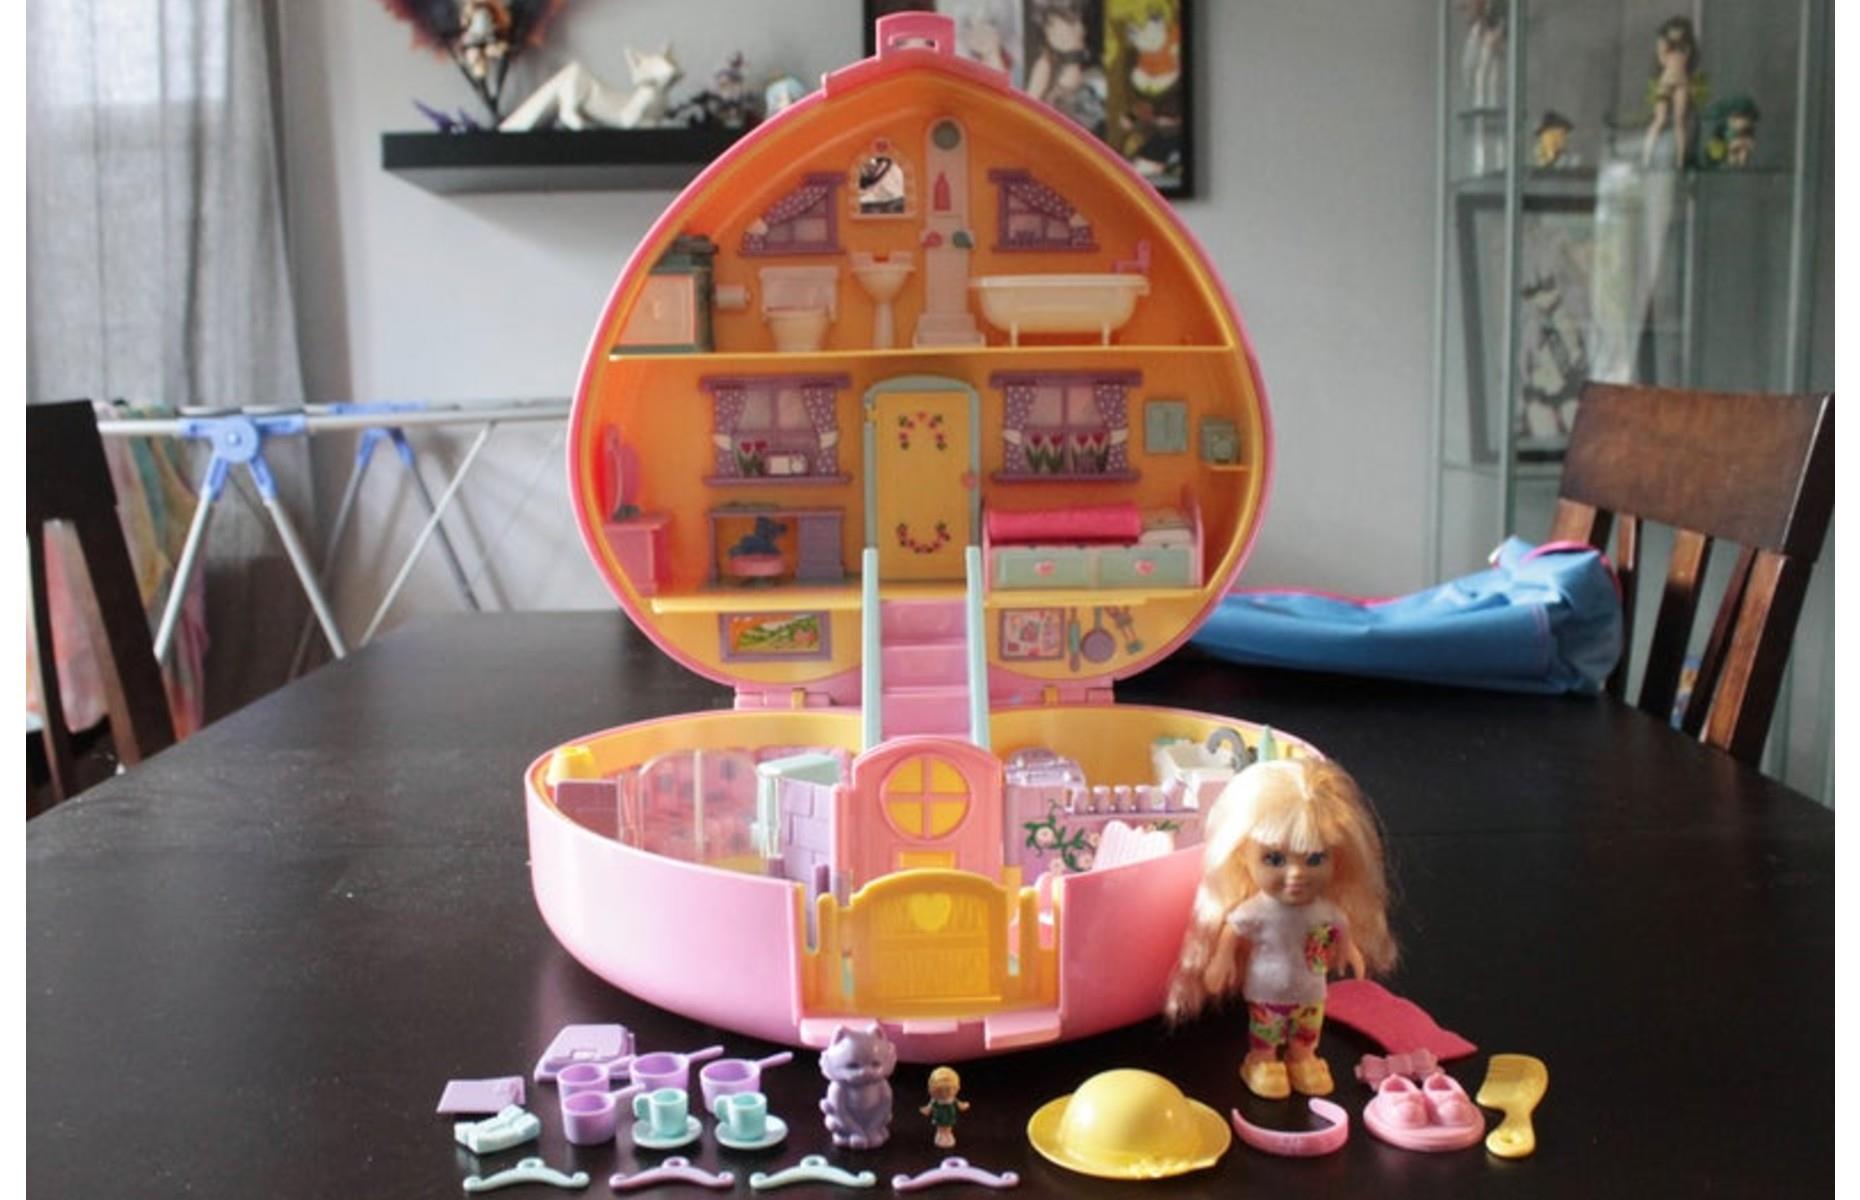 Polly Pocket Lucy Locket Carry 'N Play Dream Home: $275 (£225)